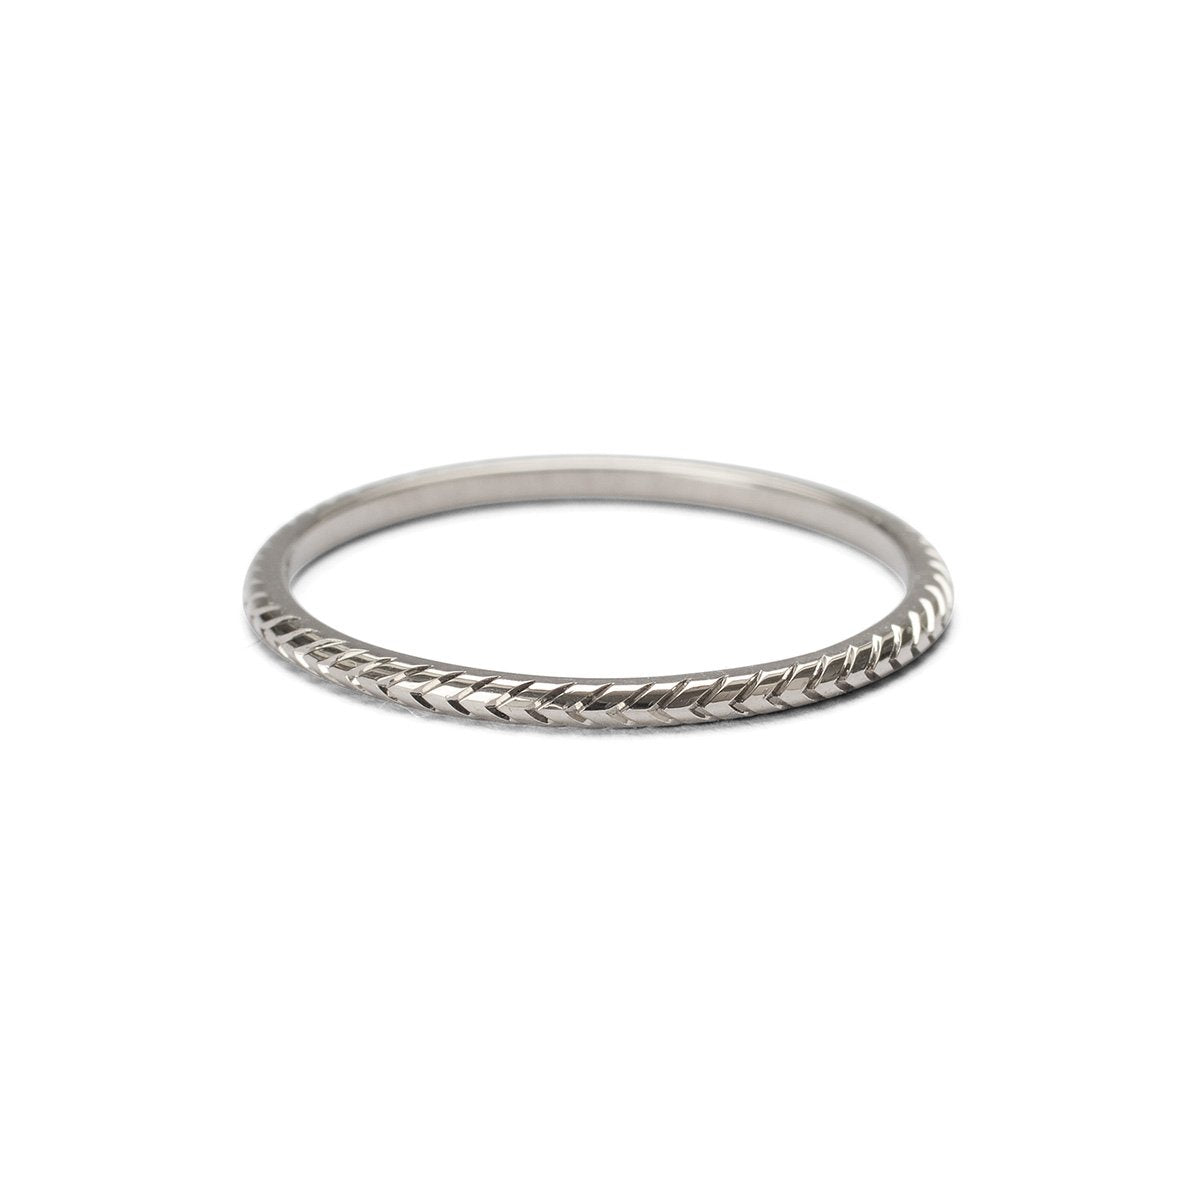 Whole feathered ring - white gold